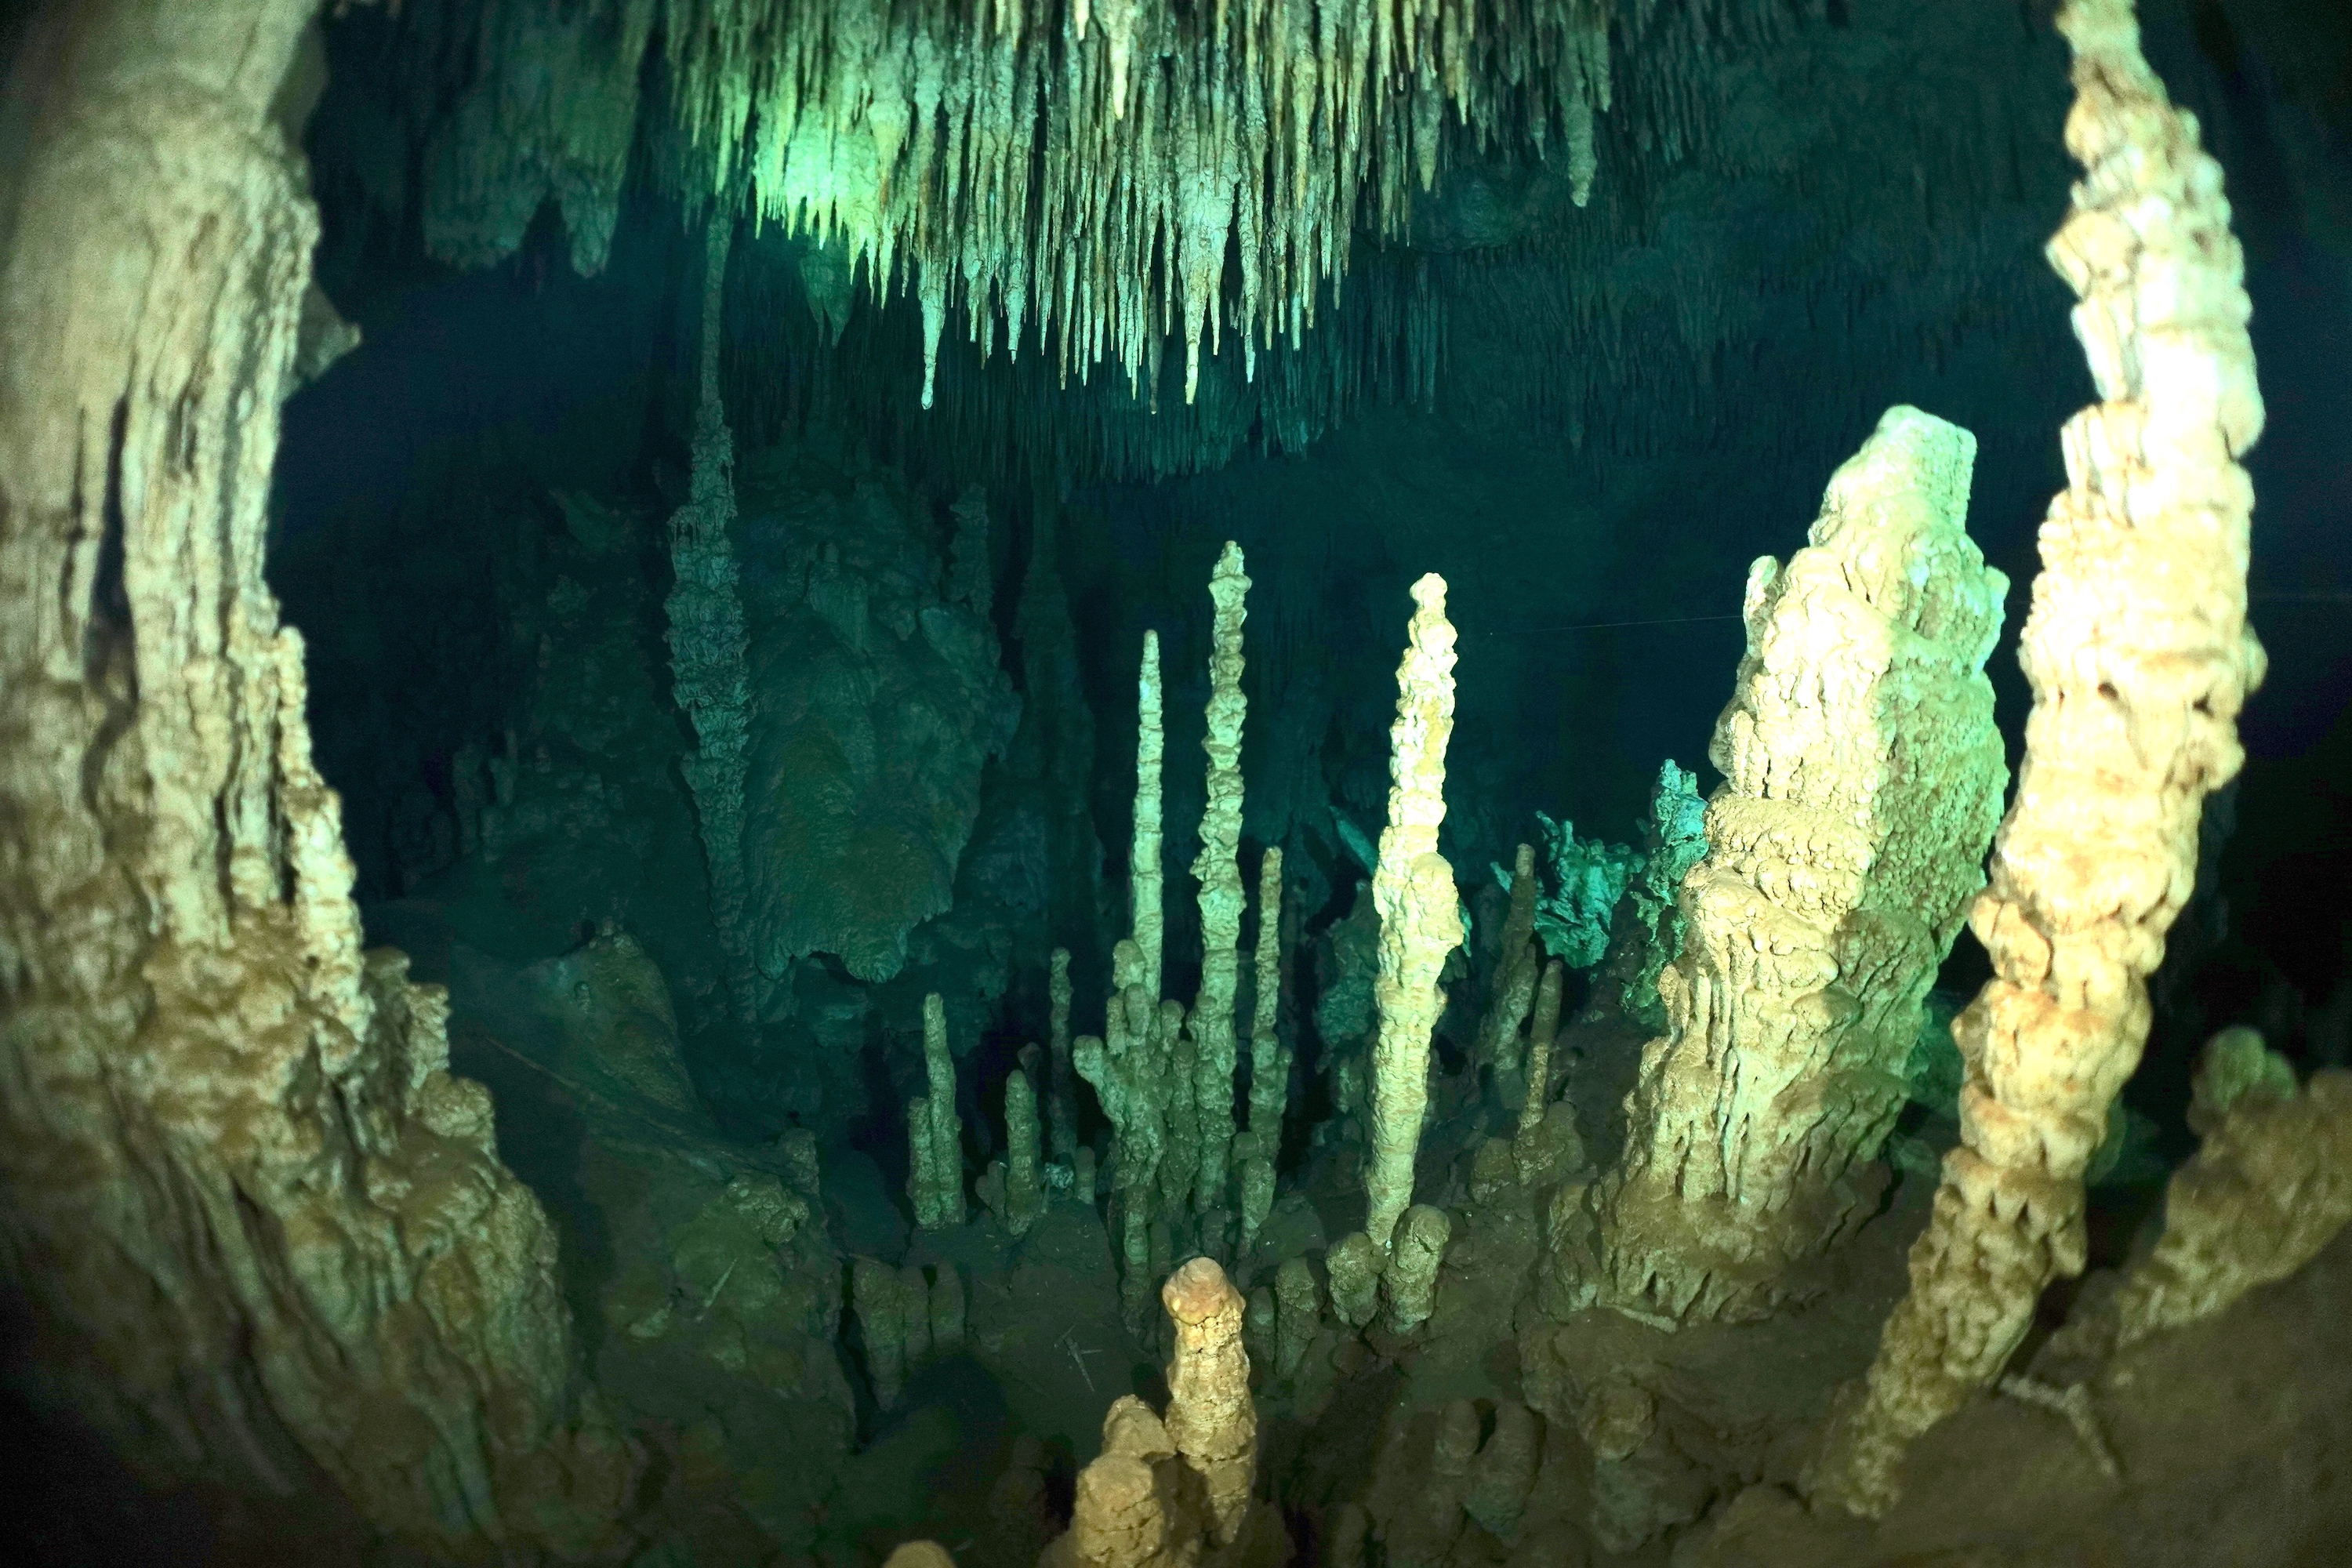 Stalagmites and stalactites in Cenote Zacil-Ha. Photo by Pierre Constant